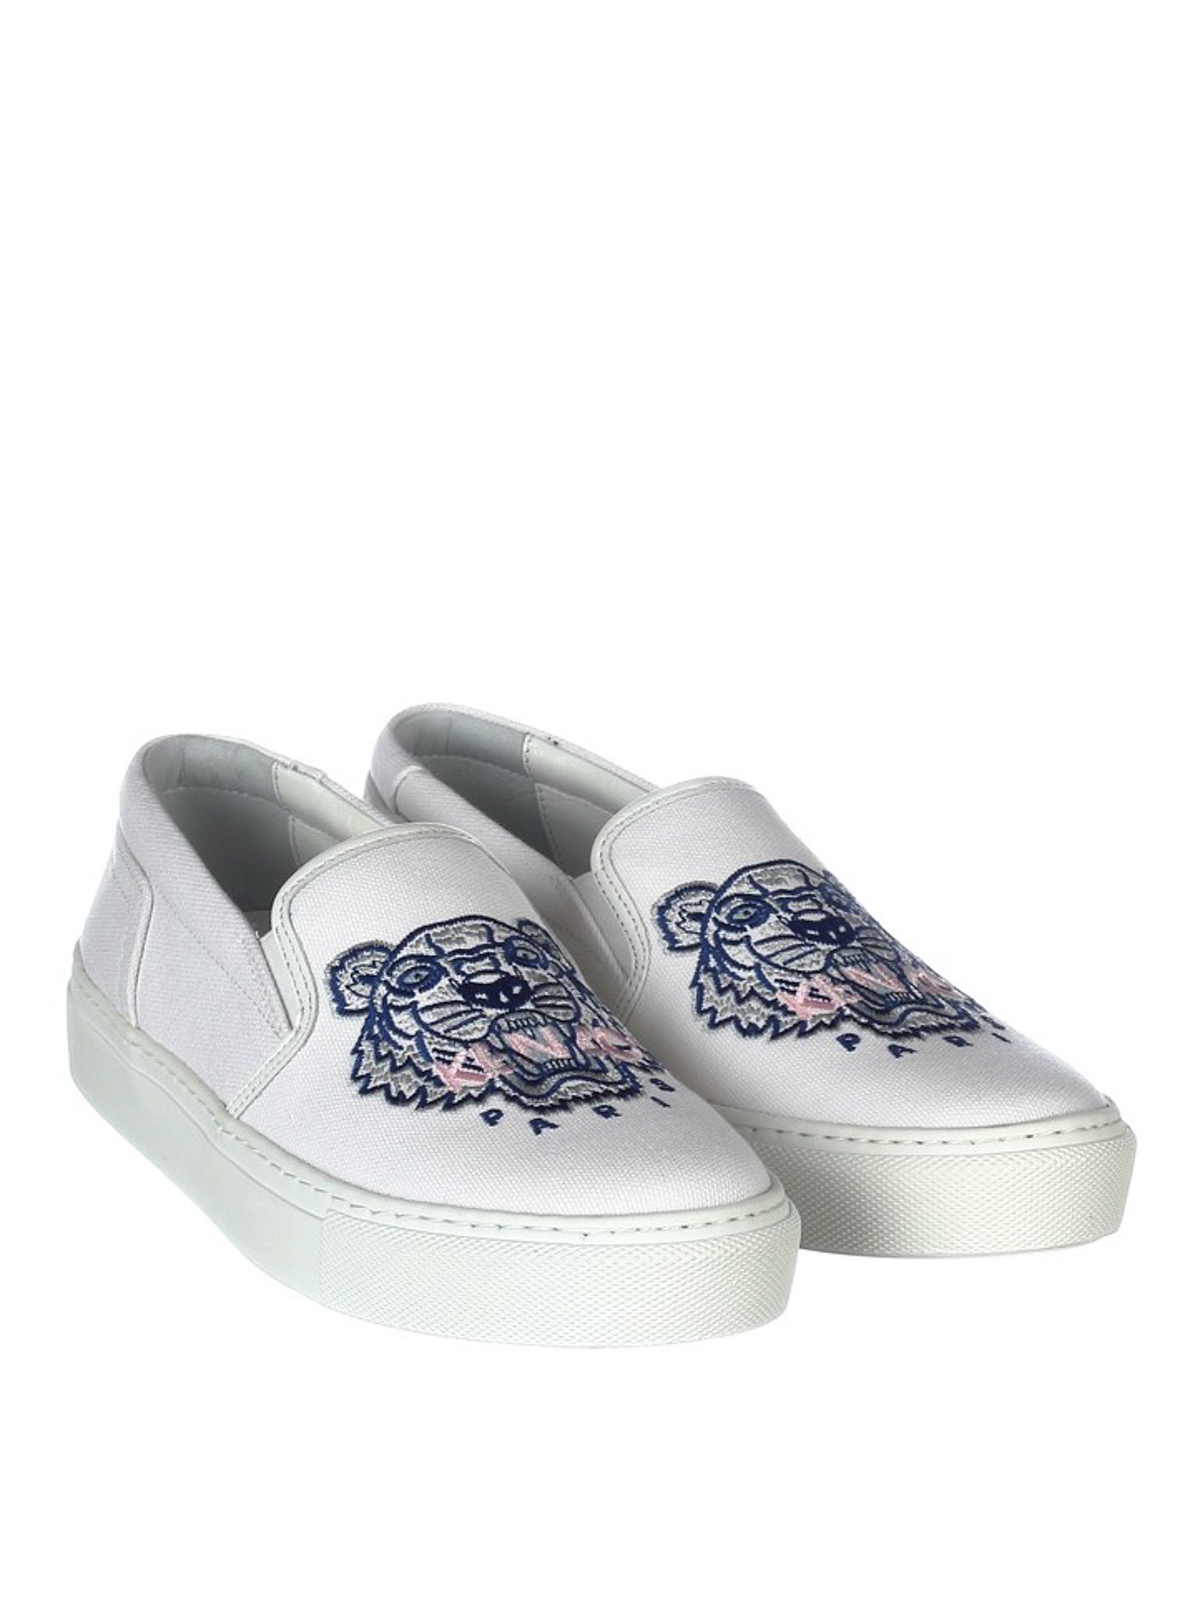 kenzo slip on trainers, OFF 72%,Free 